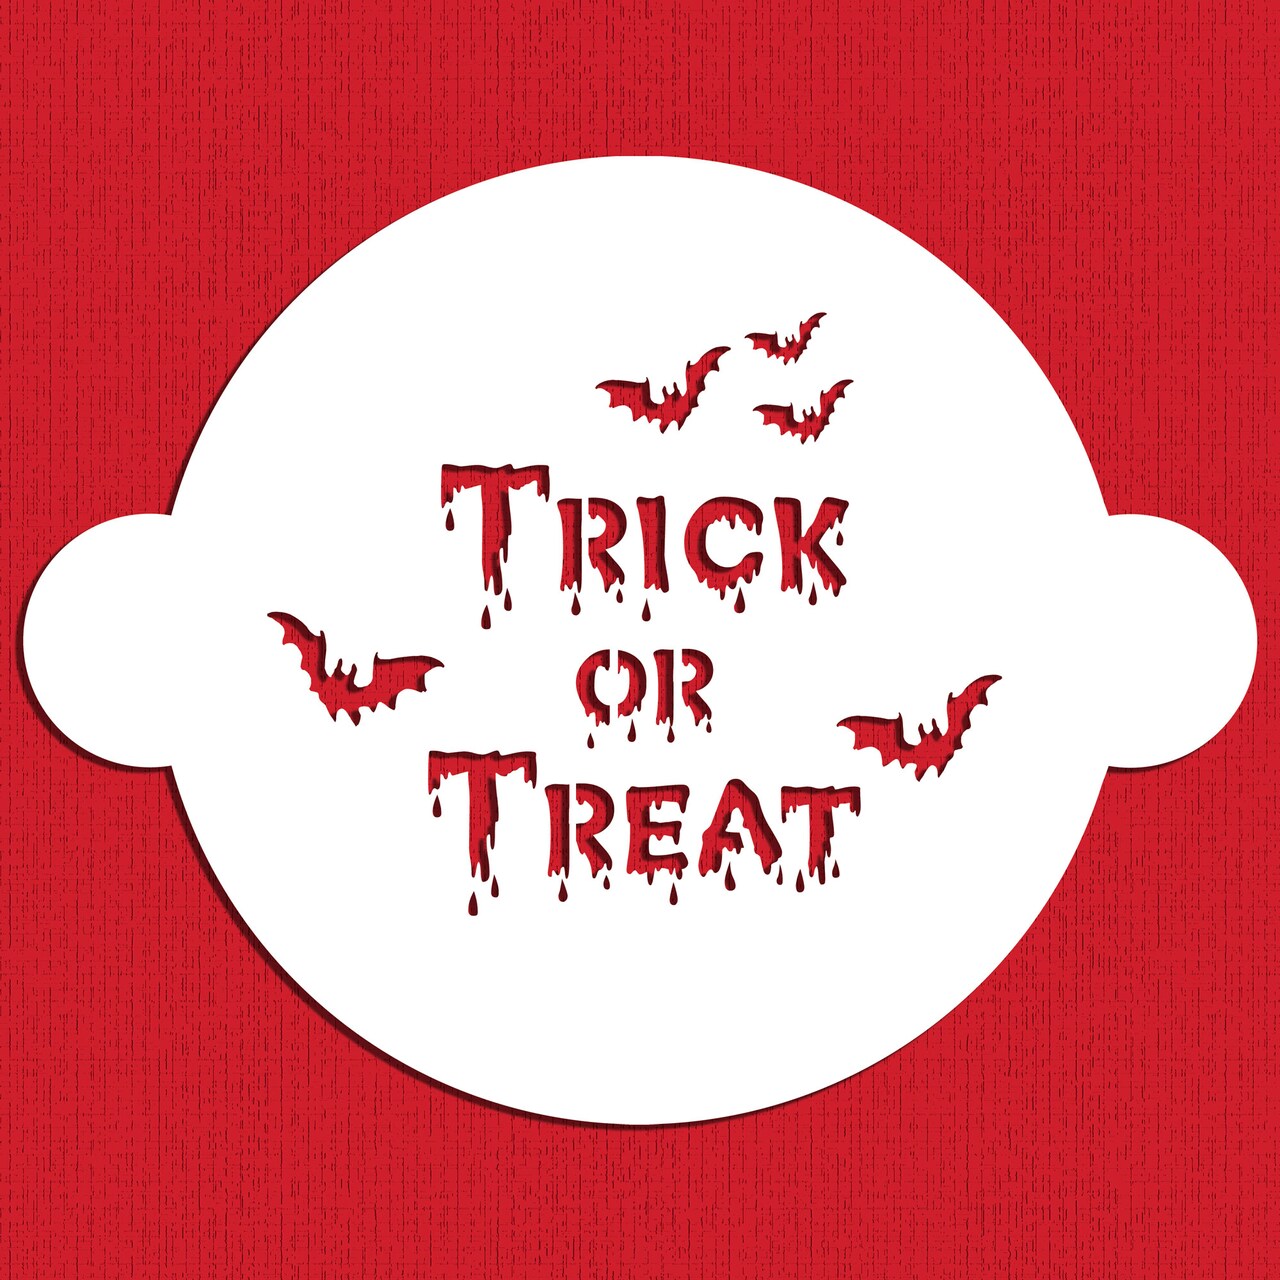 Halloween Trick or Treat Cake Stencil | C383 by Designer Stencils | Cake Decorating Tools | Baking Stencils for Royal Icing, Airbrush, Dusting Powder | Reusable Plastic Food Grade Stencil for Cakes | Easy to Use &#x26; Clean Cake Stencil